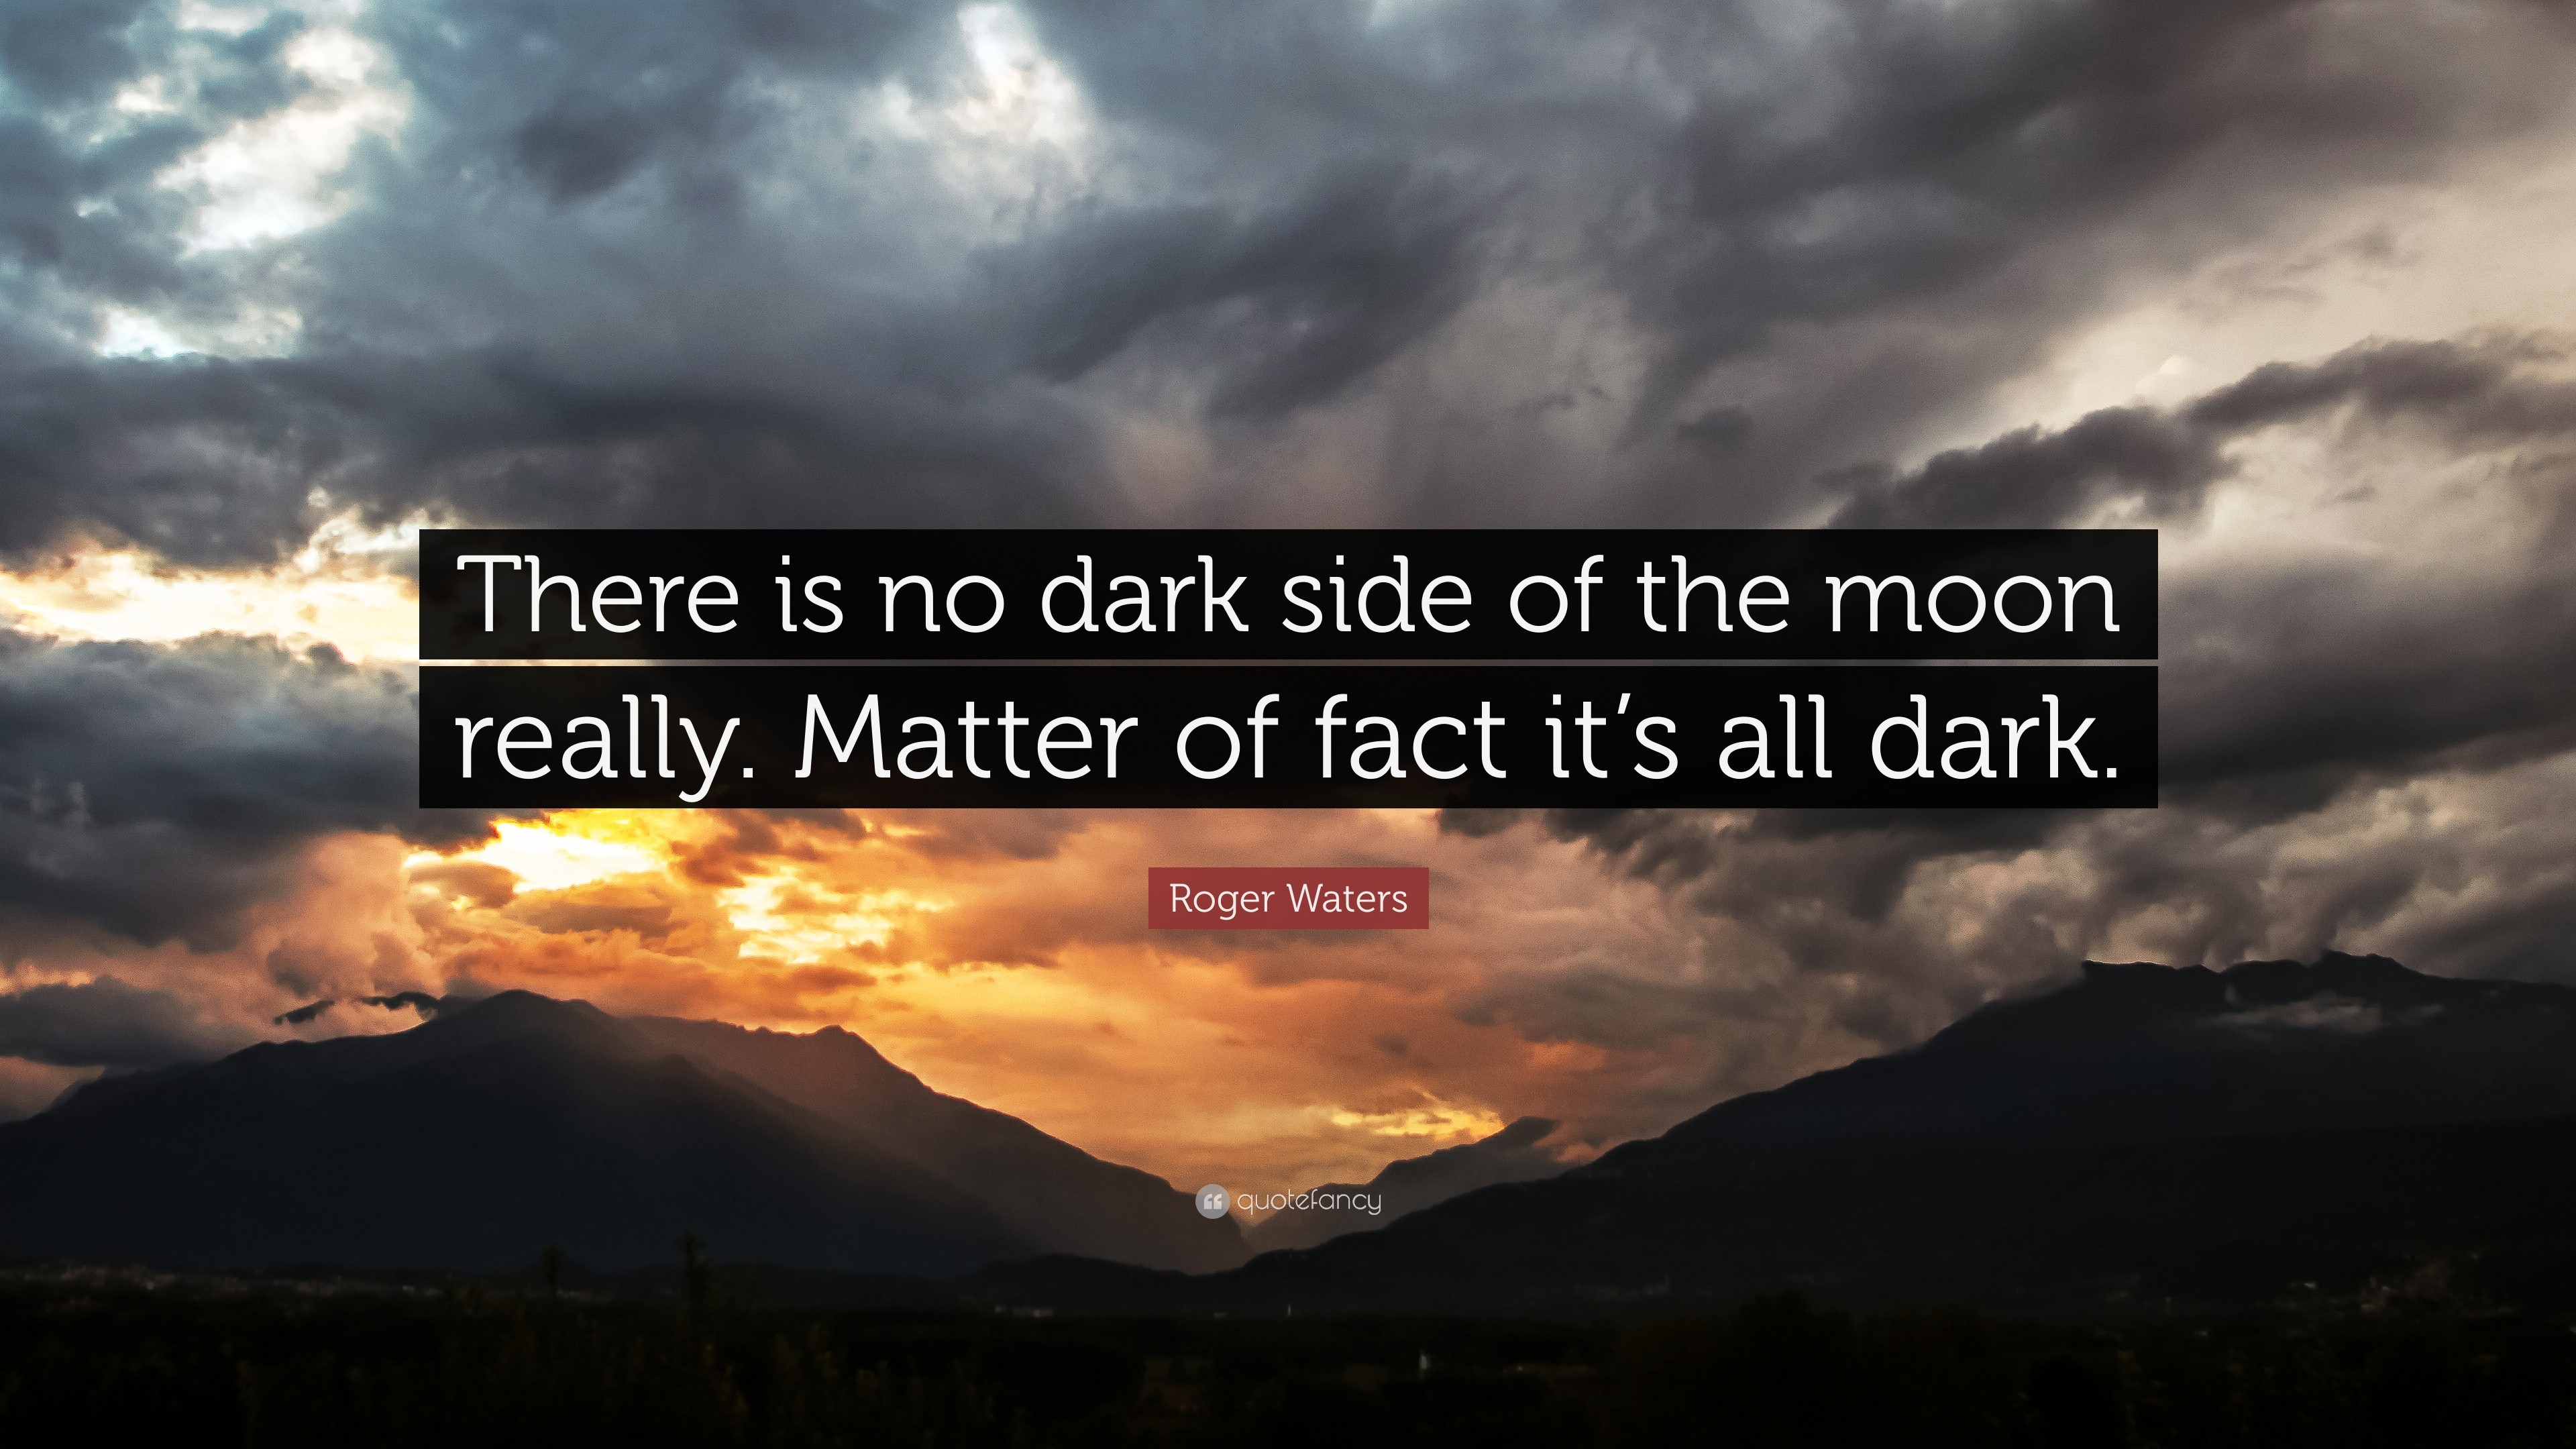 3840x2160 Roger Waters Quote: “There is no dark side of the moon really. Matter